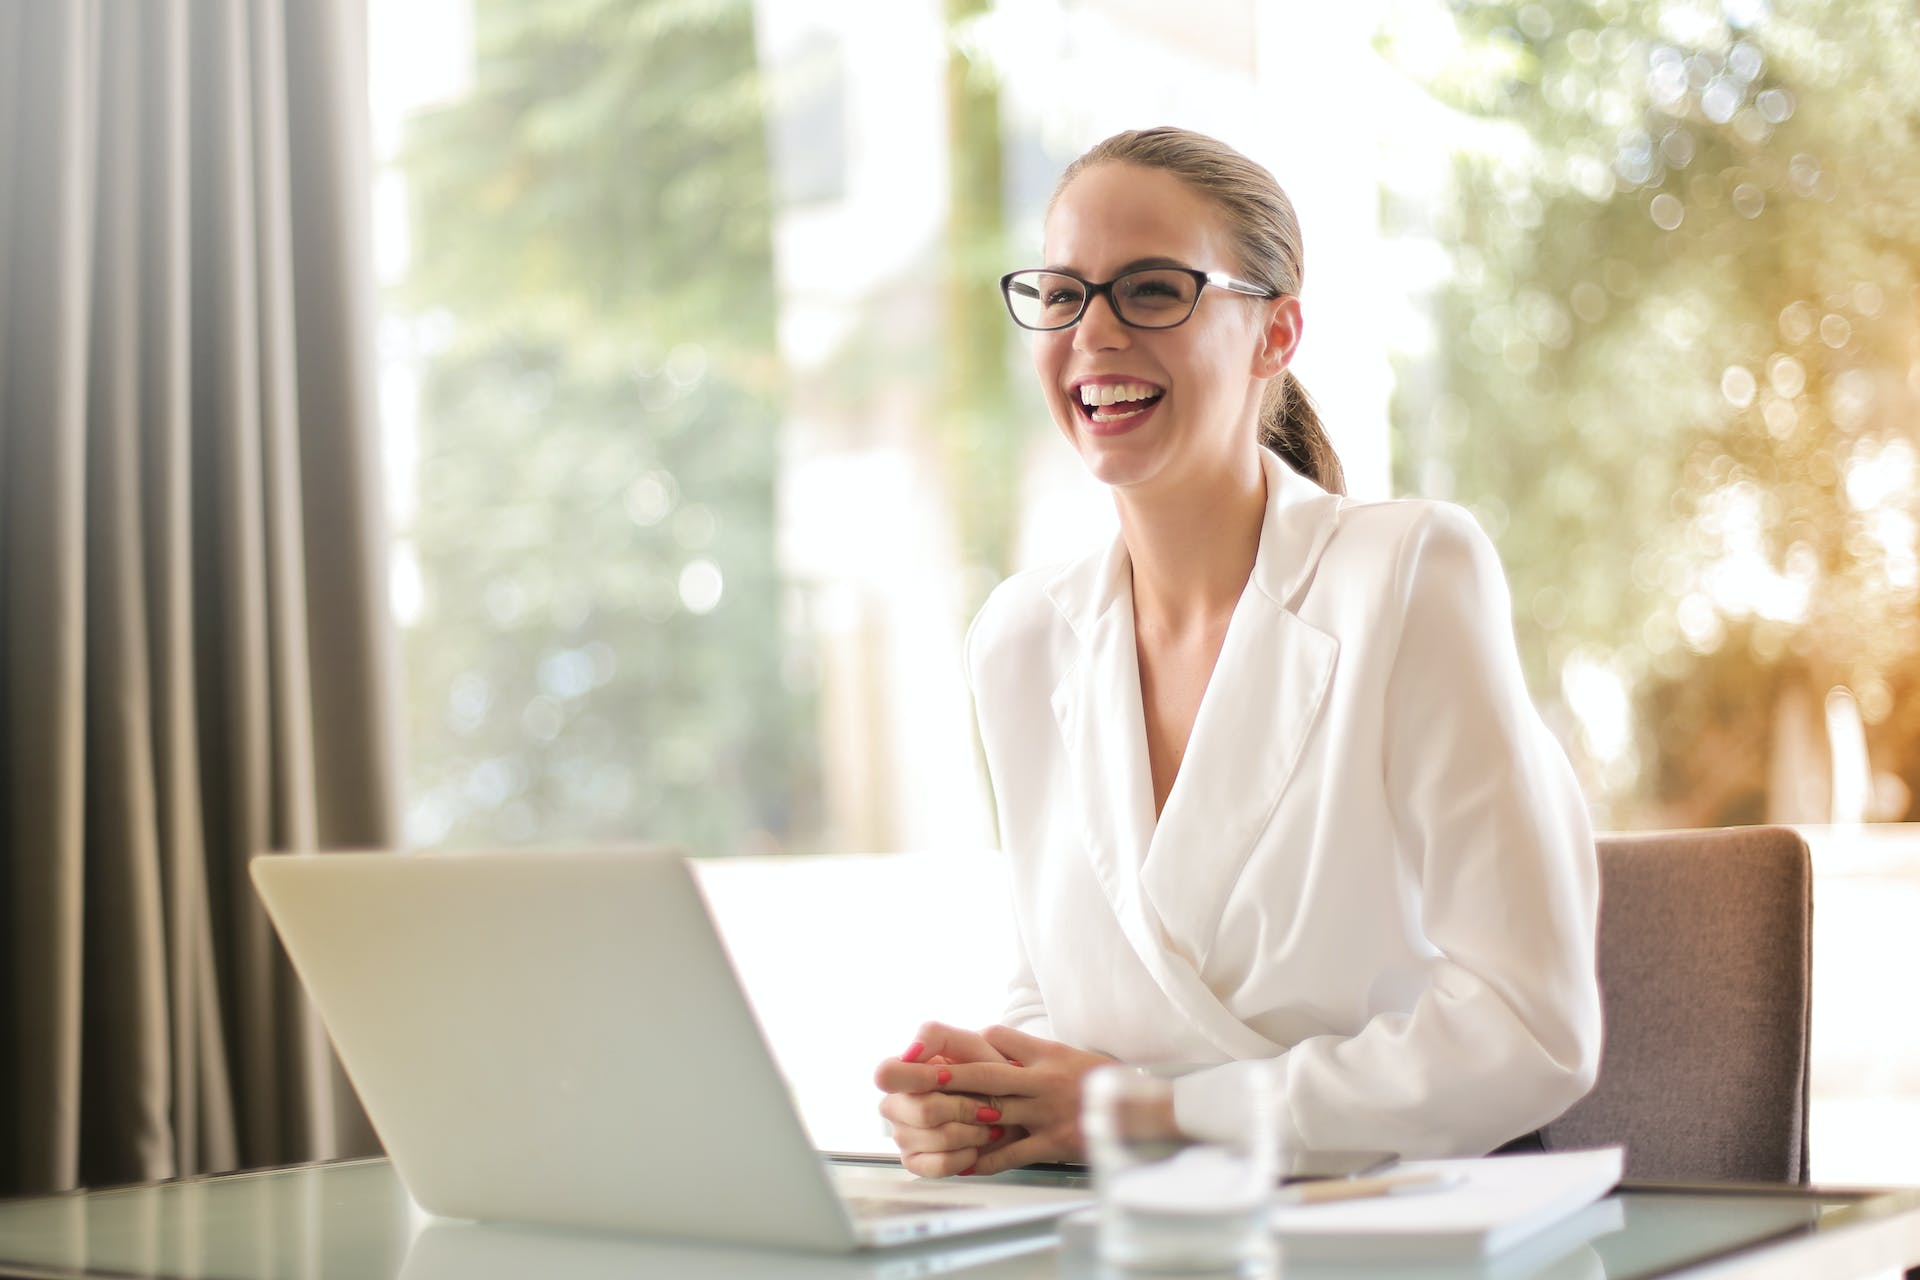 Smiling woman working on her laptop in office | Source: Pexels